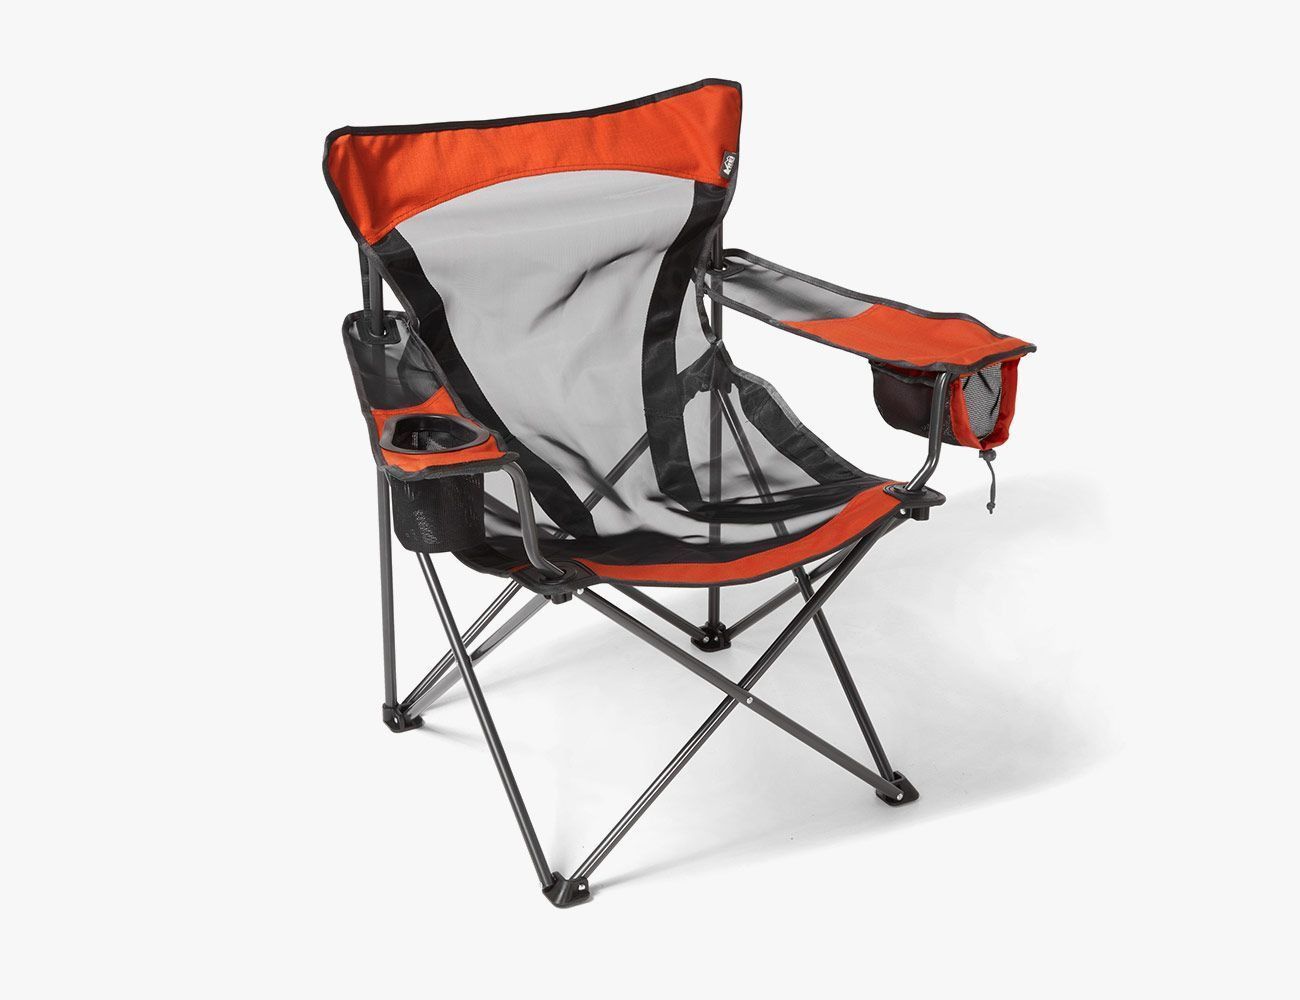 Black & Red Wild Camping Lightweight Compact Micro Outdoor Camping Chair 